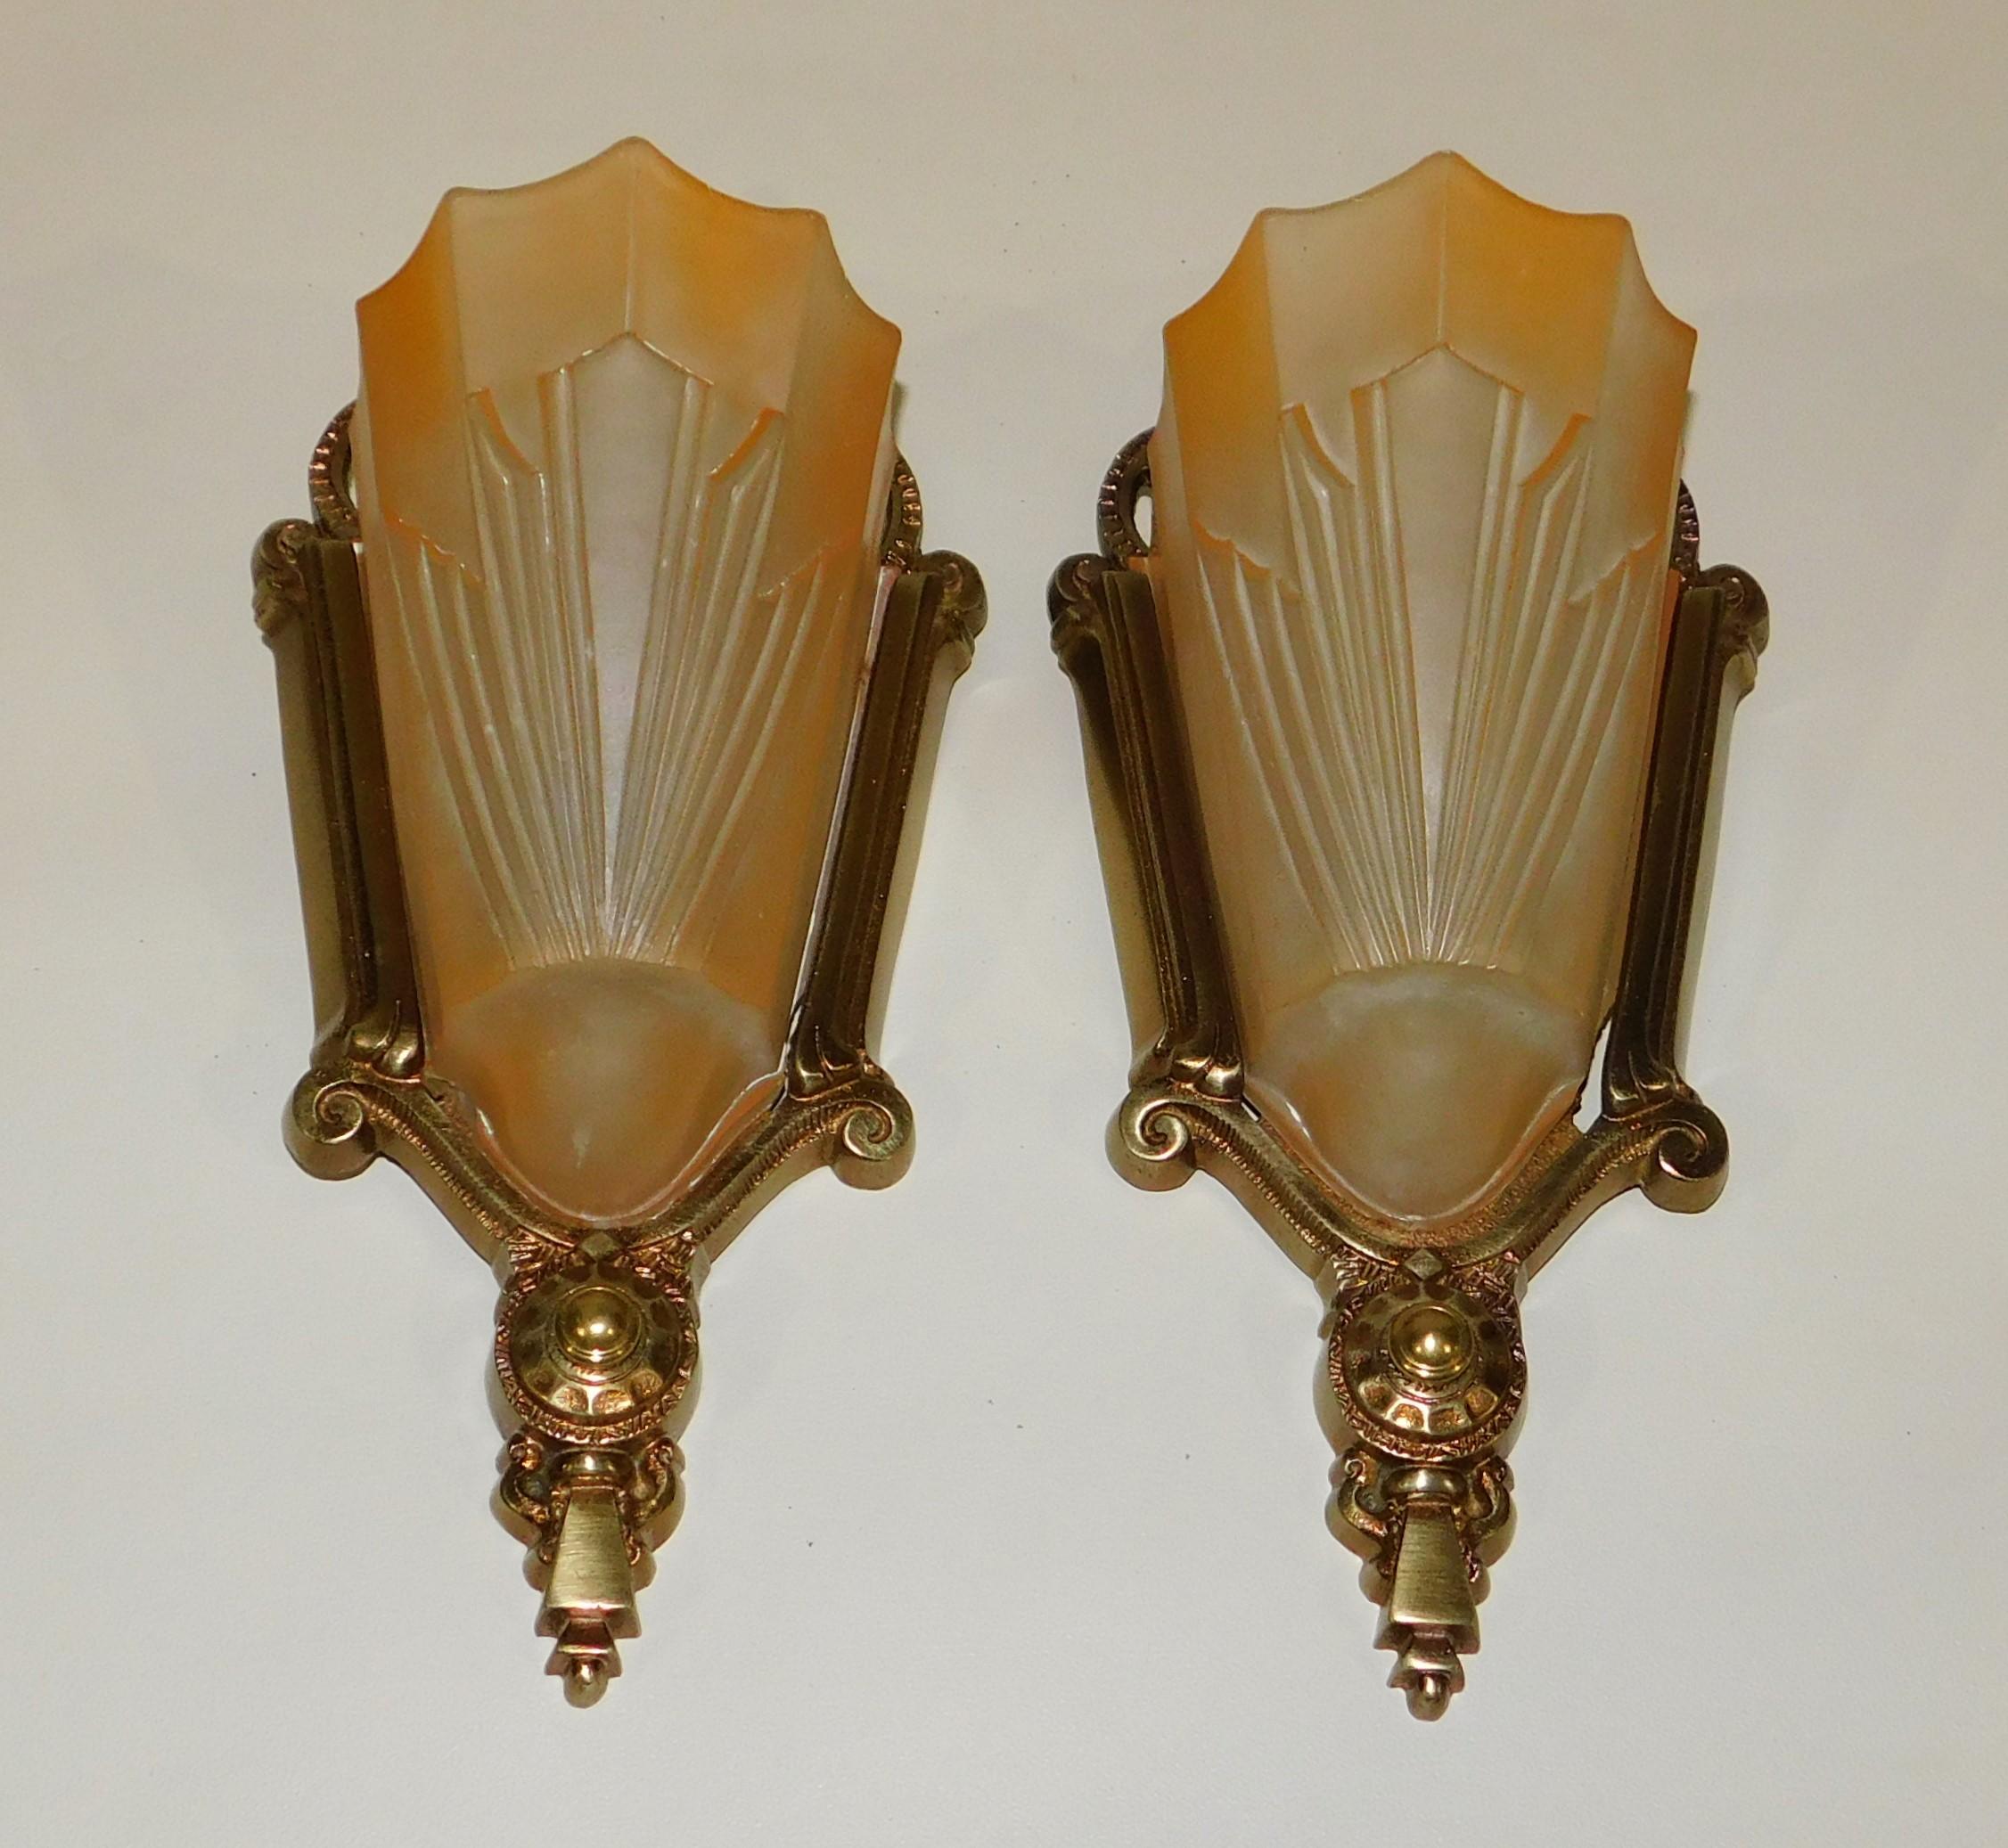 Beautiful pair of Art Deco brass wall sconces with original peach colored glass slip shades, restored and rewired, circa 1925-1930.